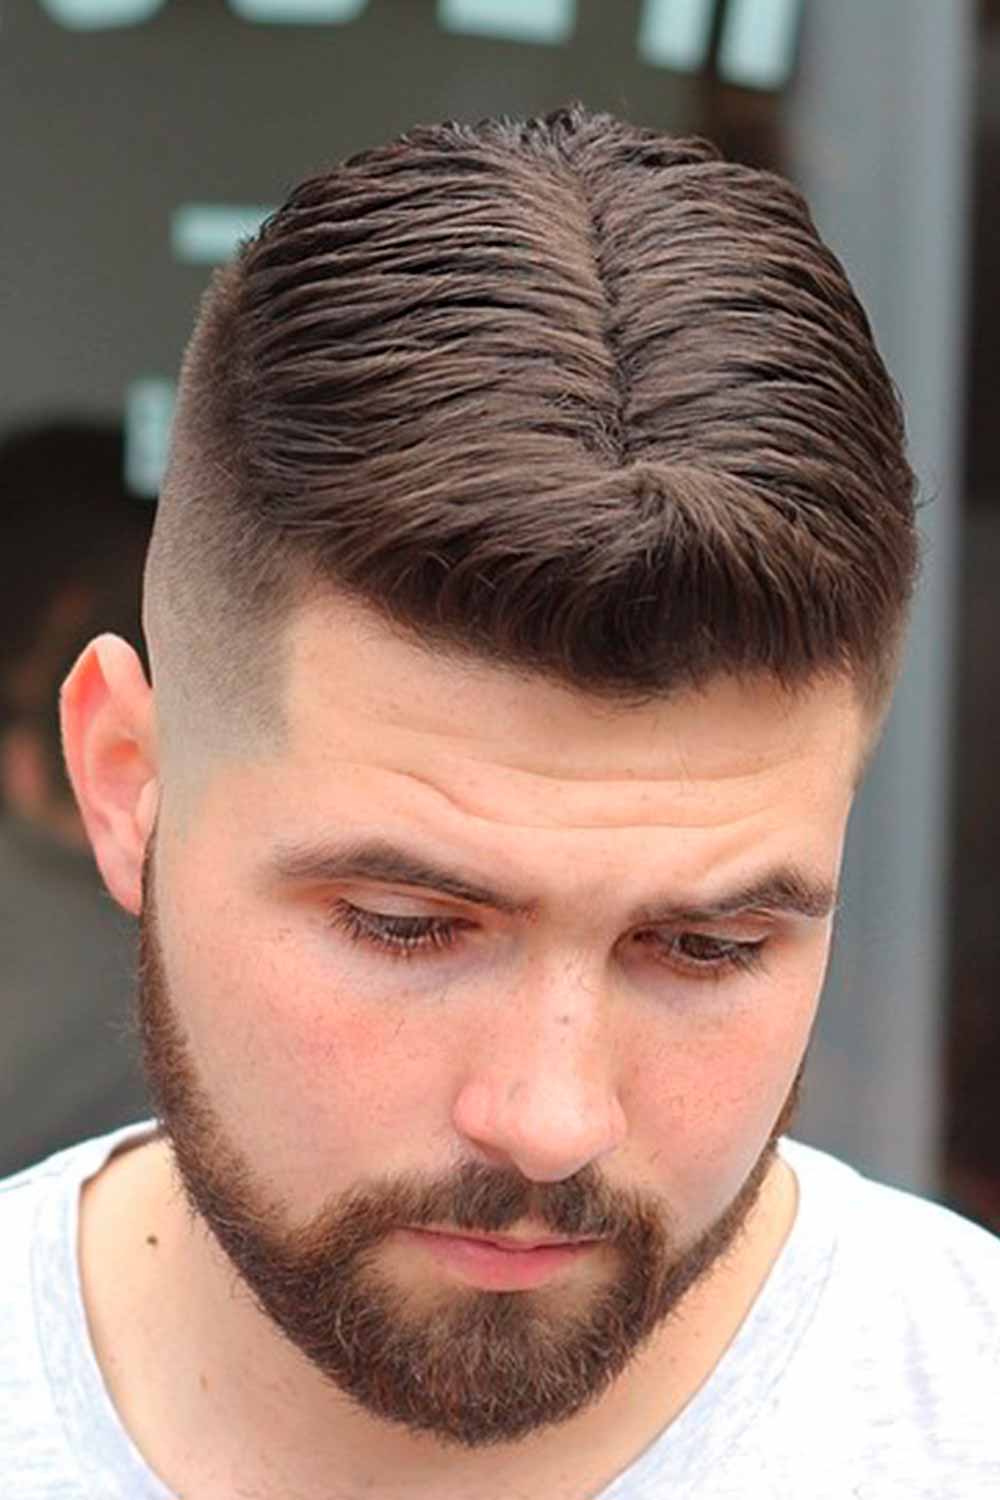 Inverse Ducktail-25 Outstanding Ducktail Haircut Variations For Men + Styling Guide